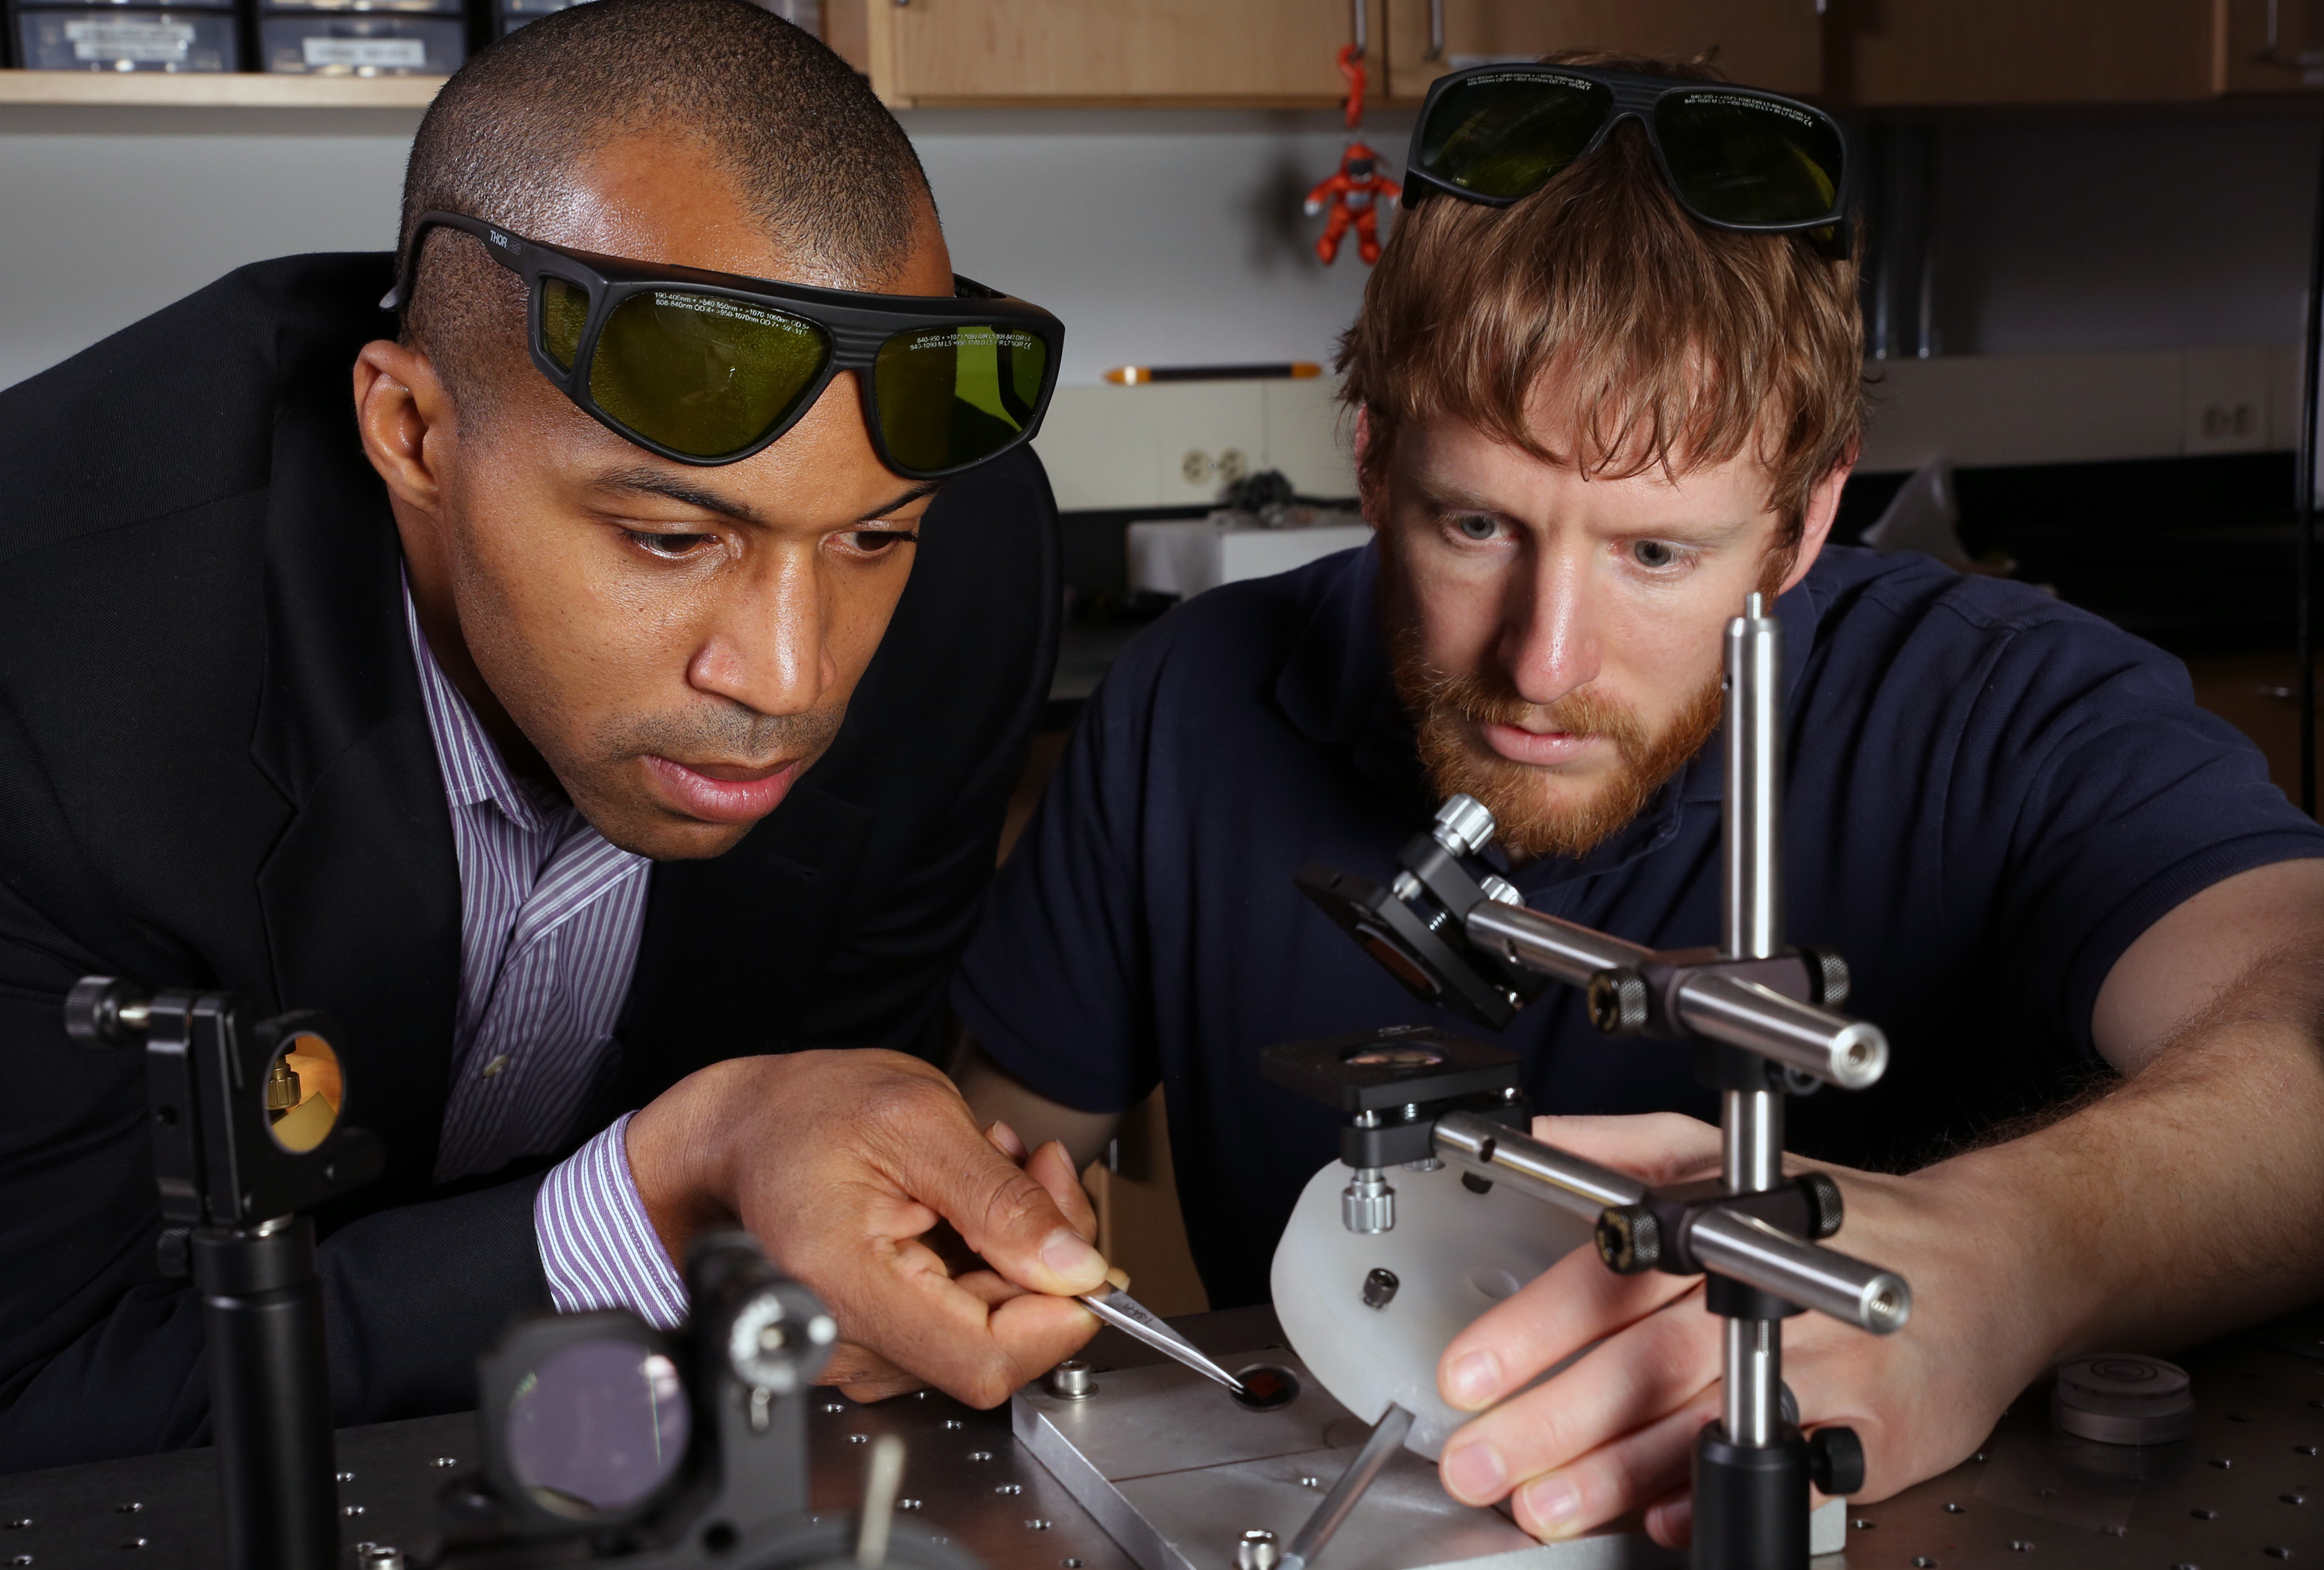 Assistant professor Baratunde Cola, from the George W. Woodruff School of Mechanical Engineering at Georgia Tech, and Ph.D. student Tom Bougher, show photoacoustic test equipment used to measure heat conductance of a new polymer material developed for thermal management. (Georgia Tech Photo: Candler Hobbs)